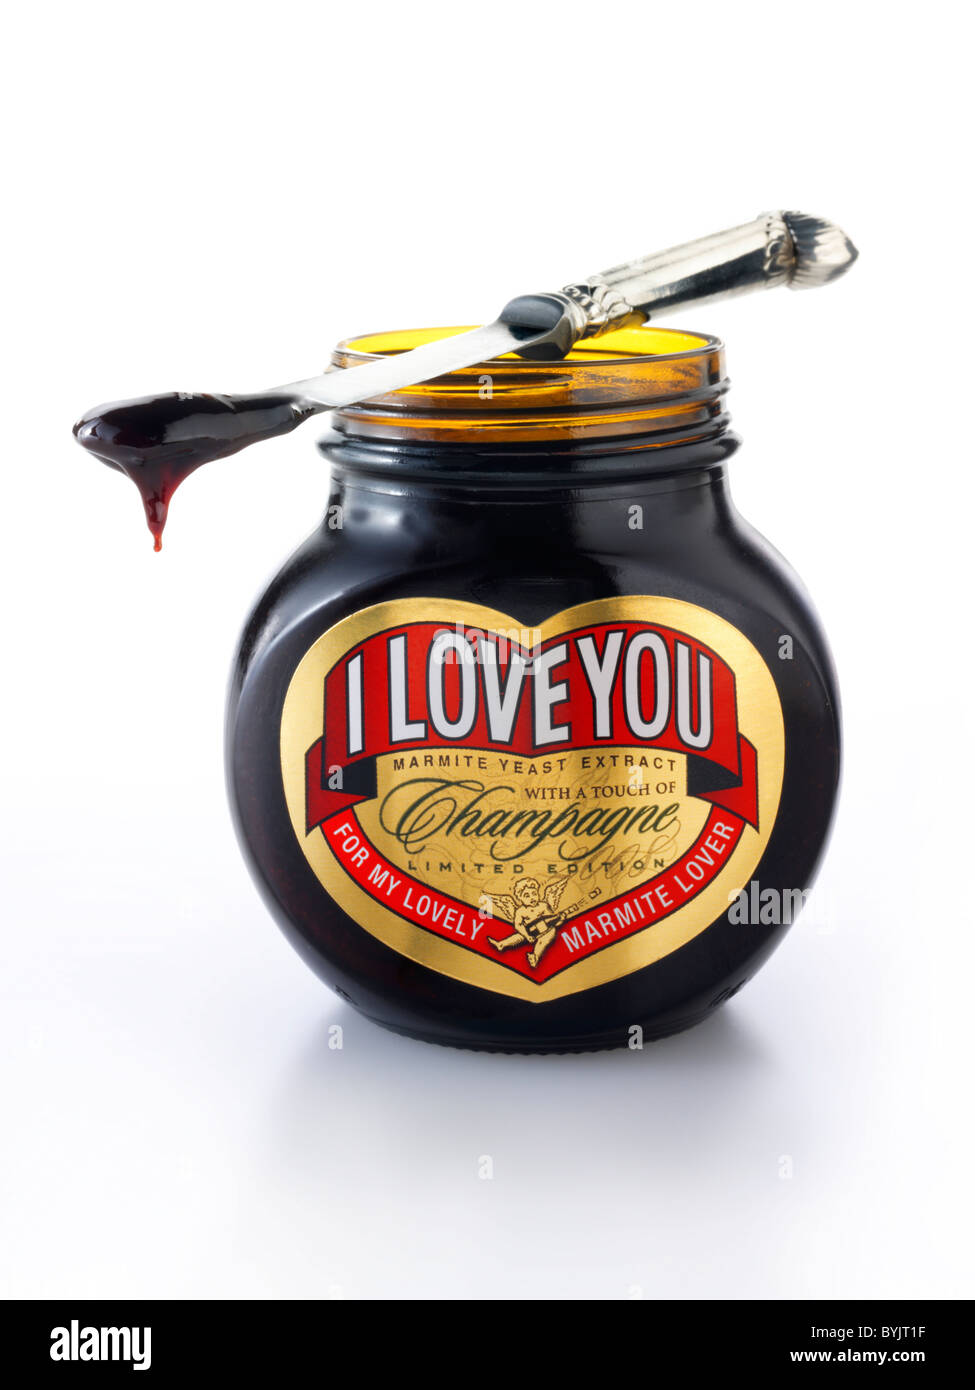 Jar of traditional Marmite with 'I Love You' on label Stock Photo